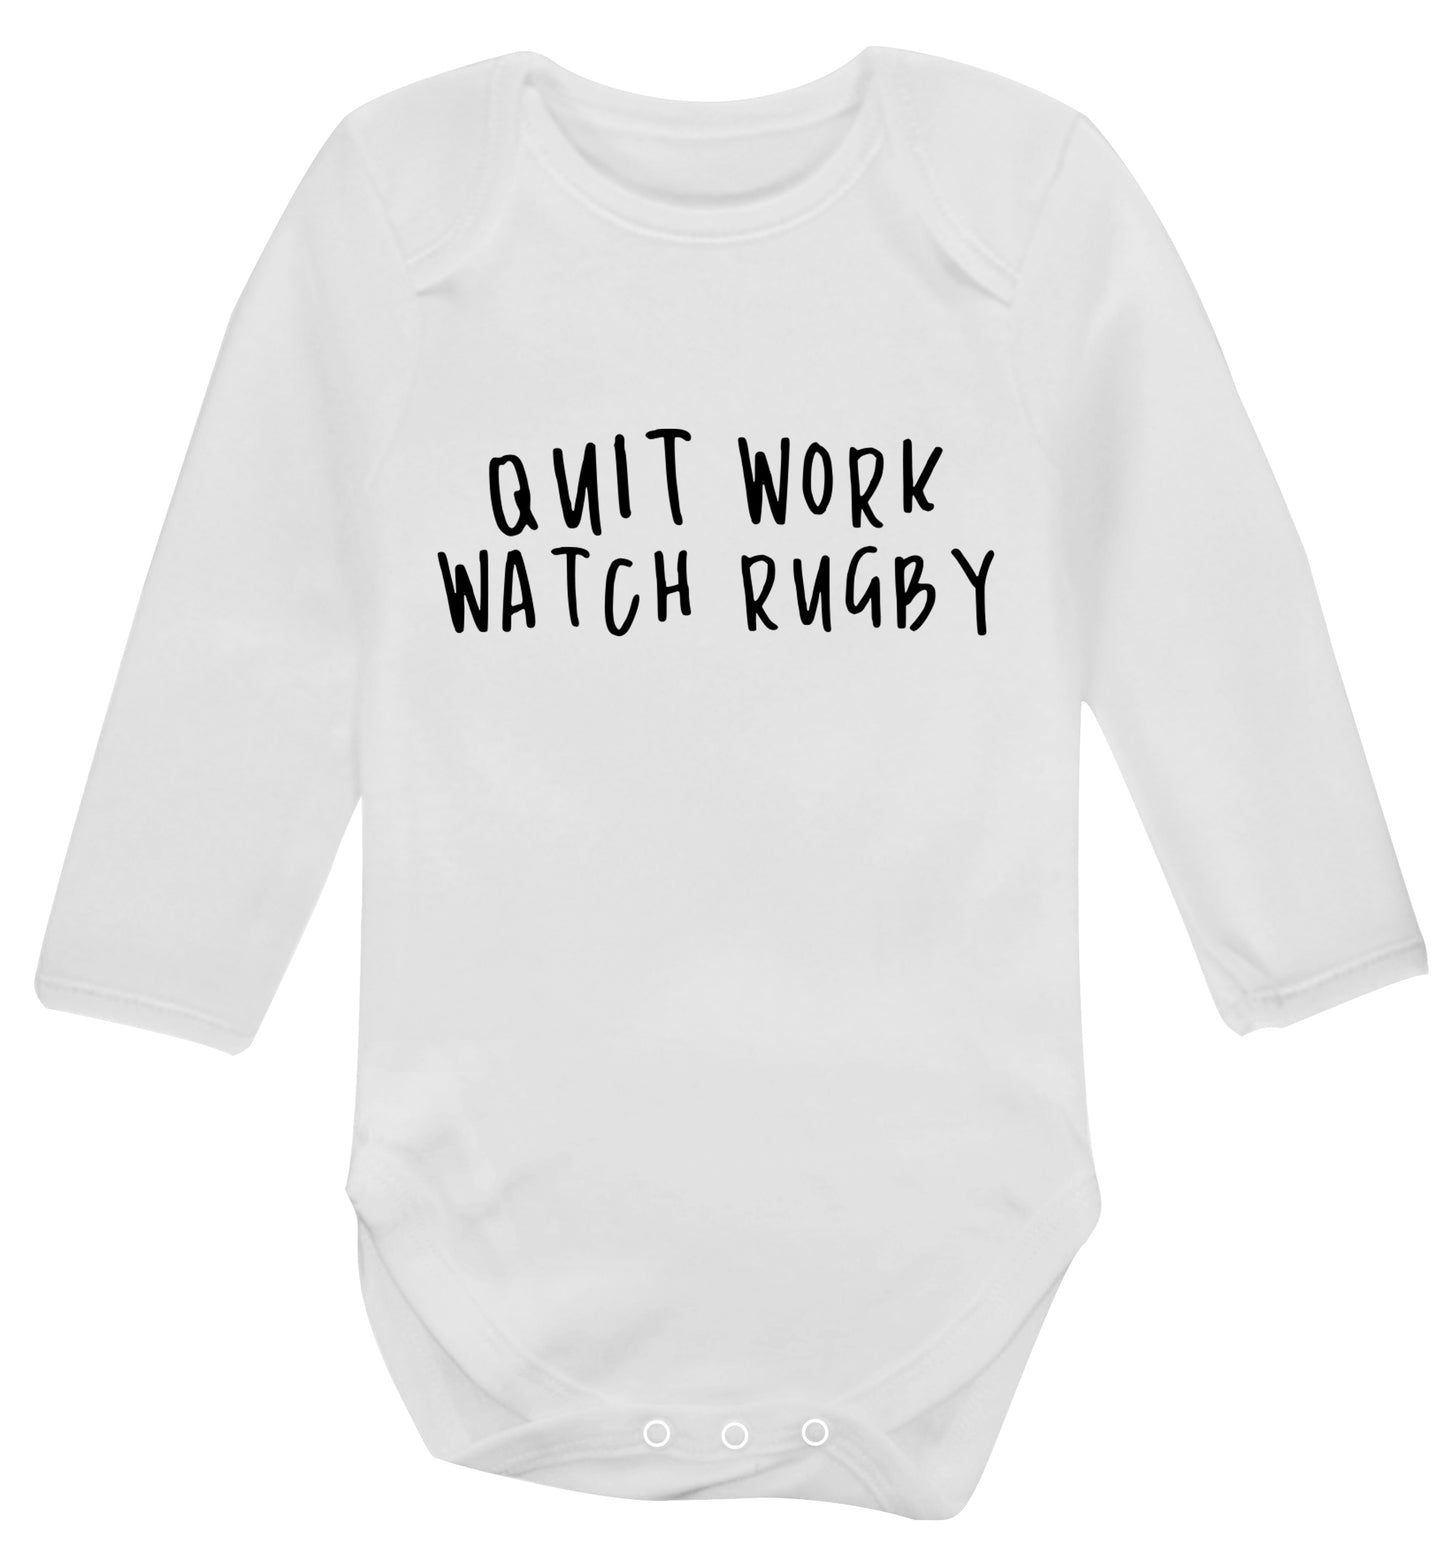 Quit work watch rugby Baby Vest long sleeved white 6-12 months